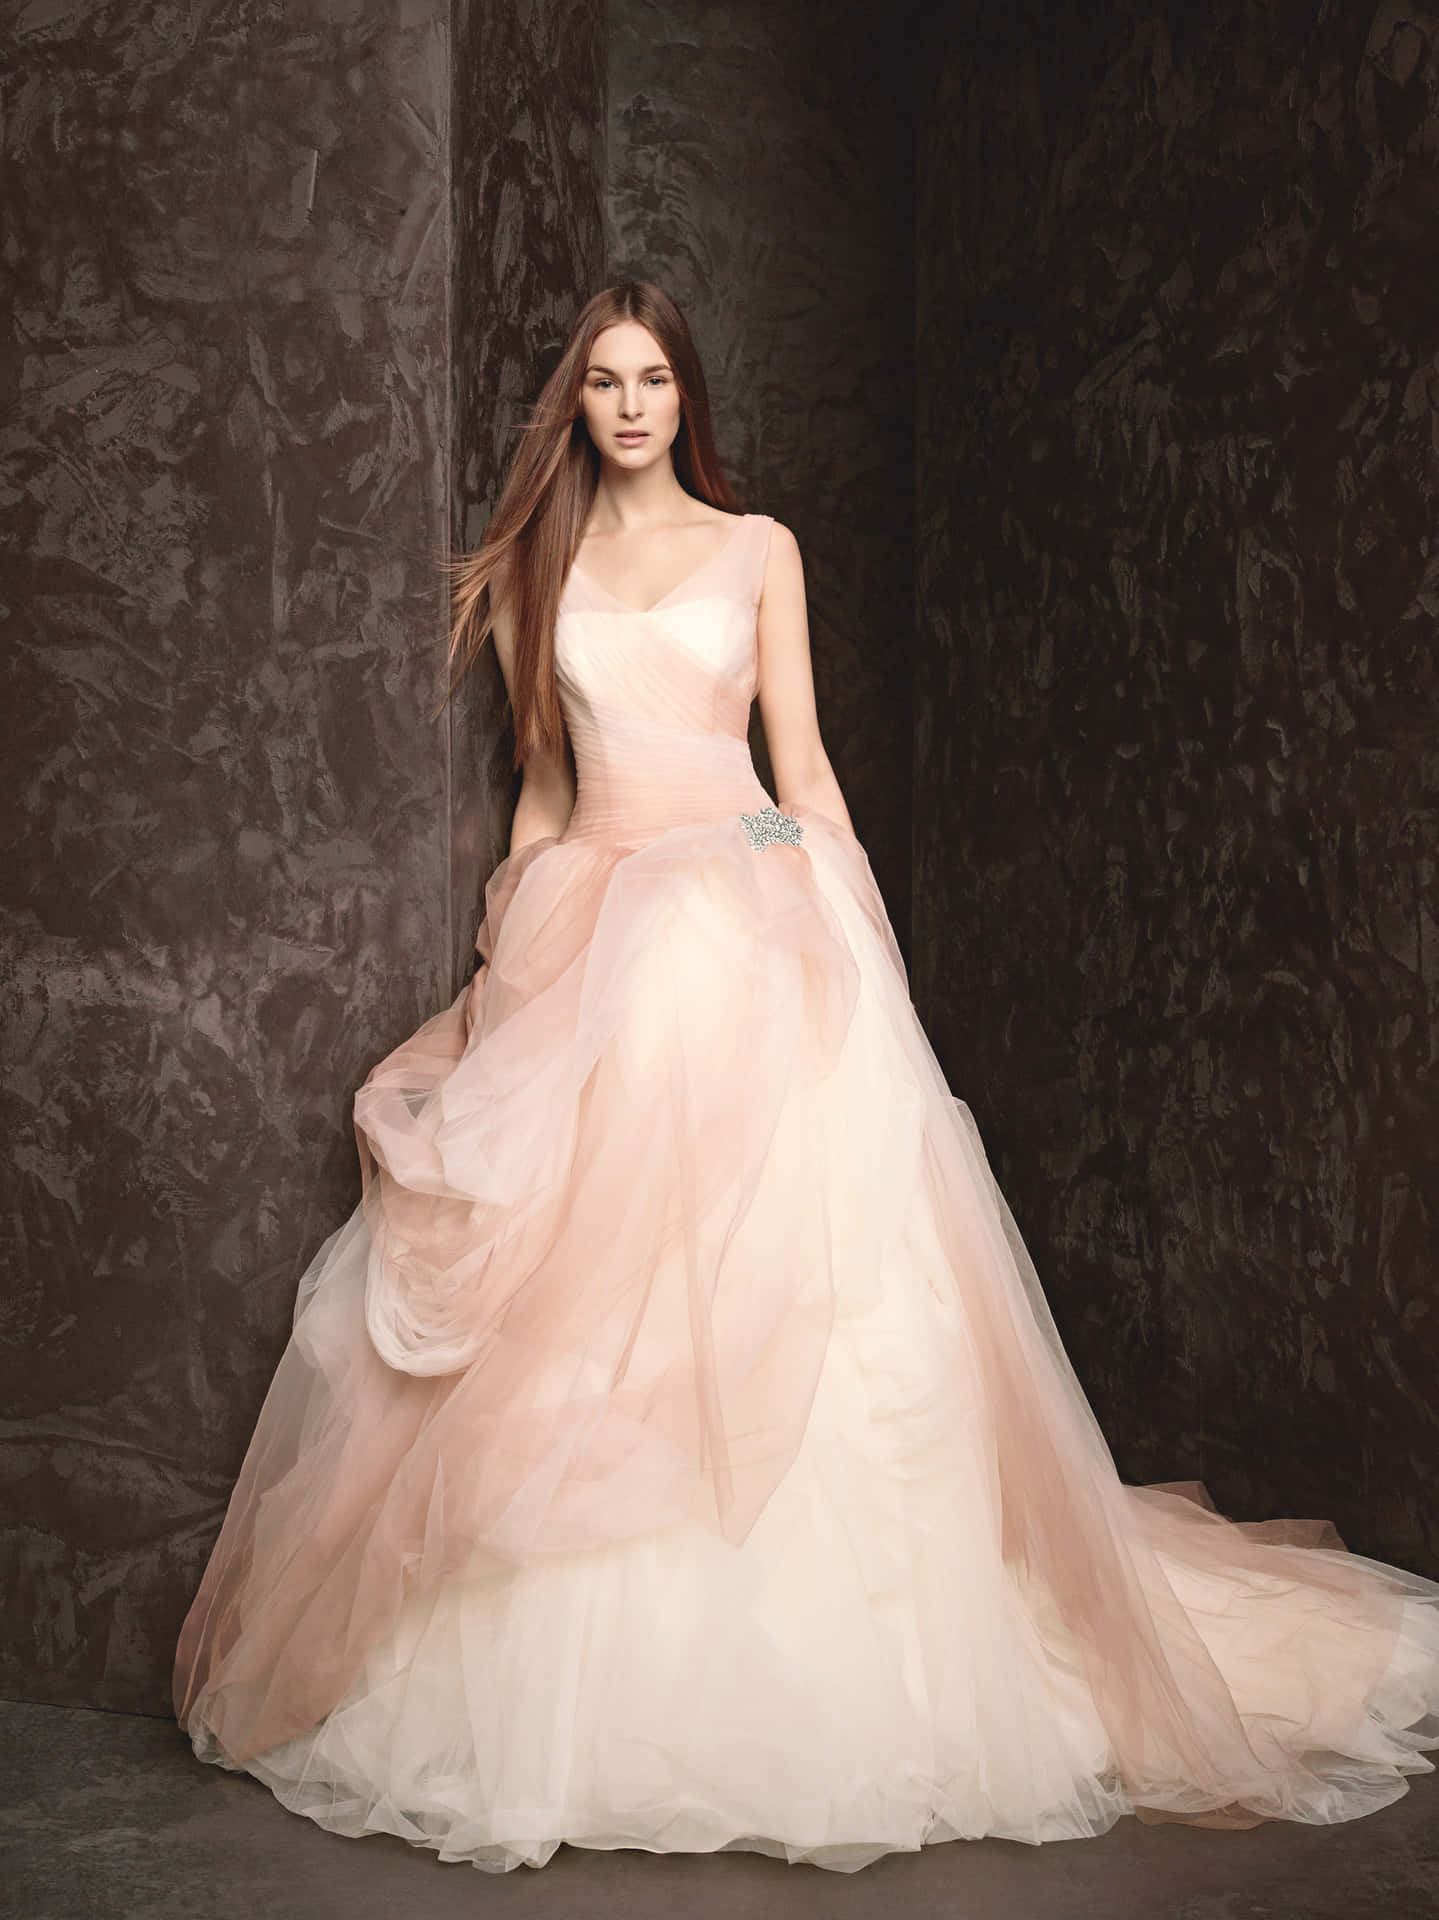 A Woman In A Pink Wedding Dress Is Posing Against A Wall